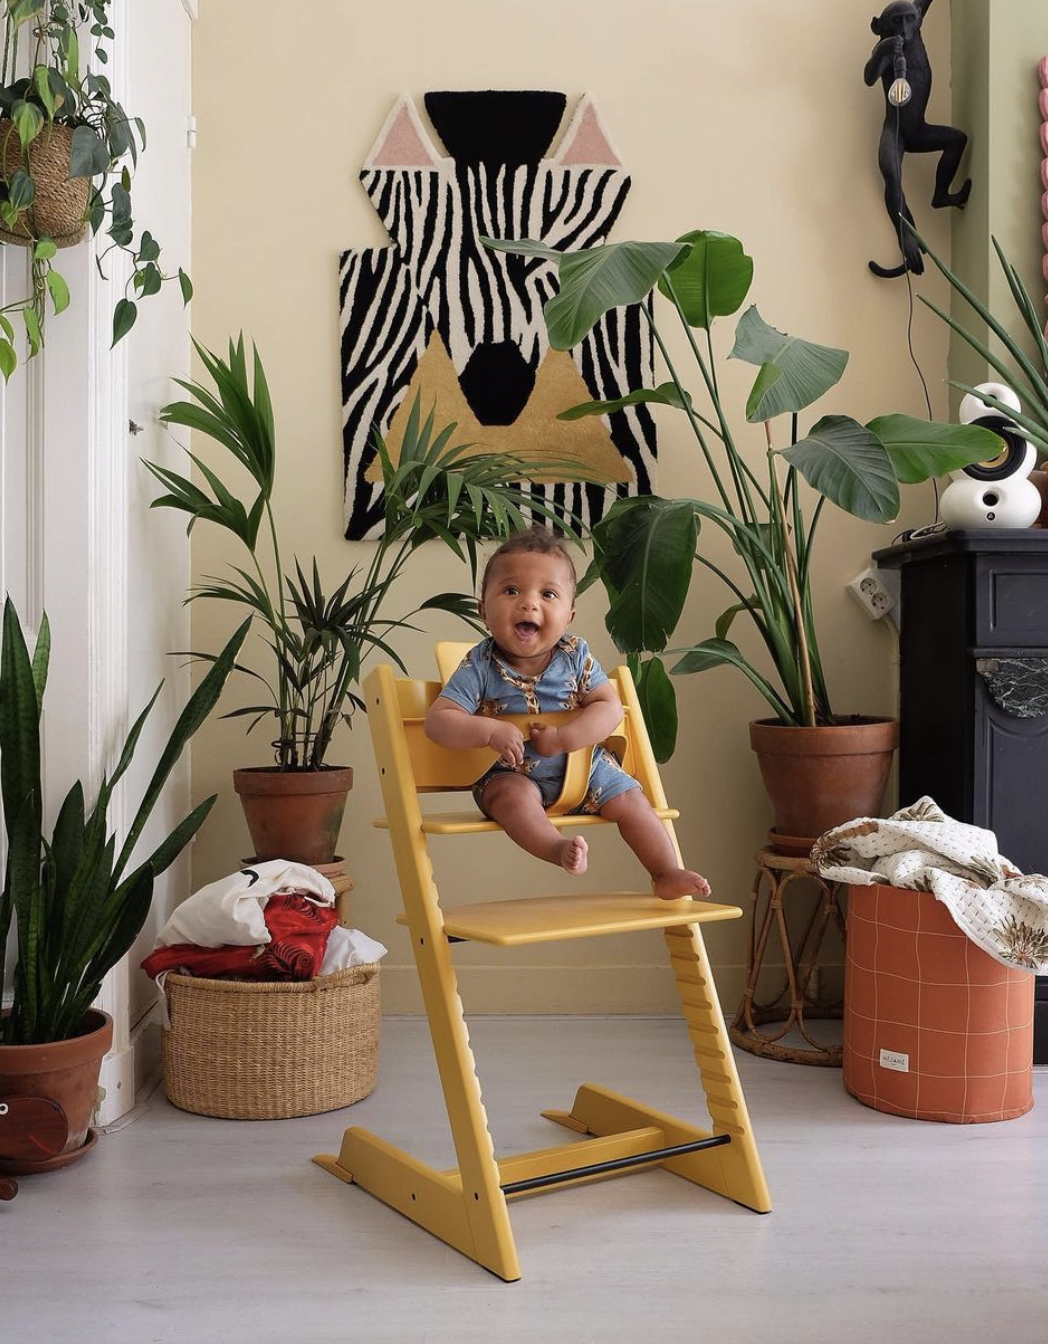 A cute baby sitting in a yellow Stokke high chair.